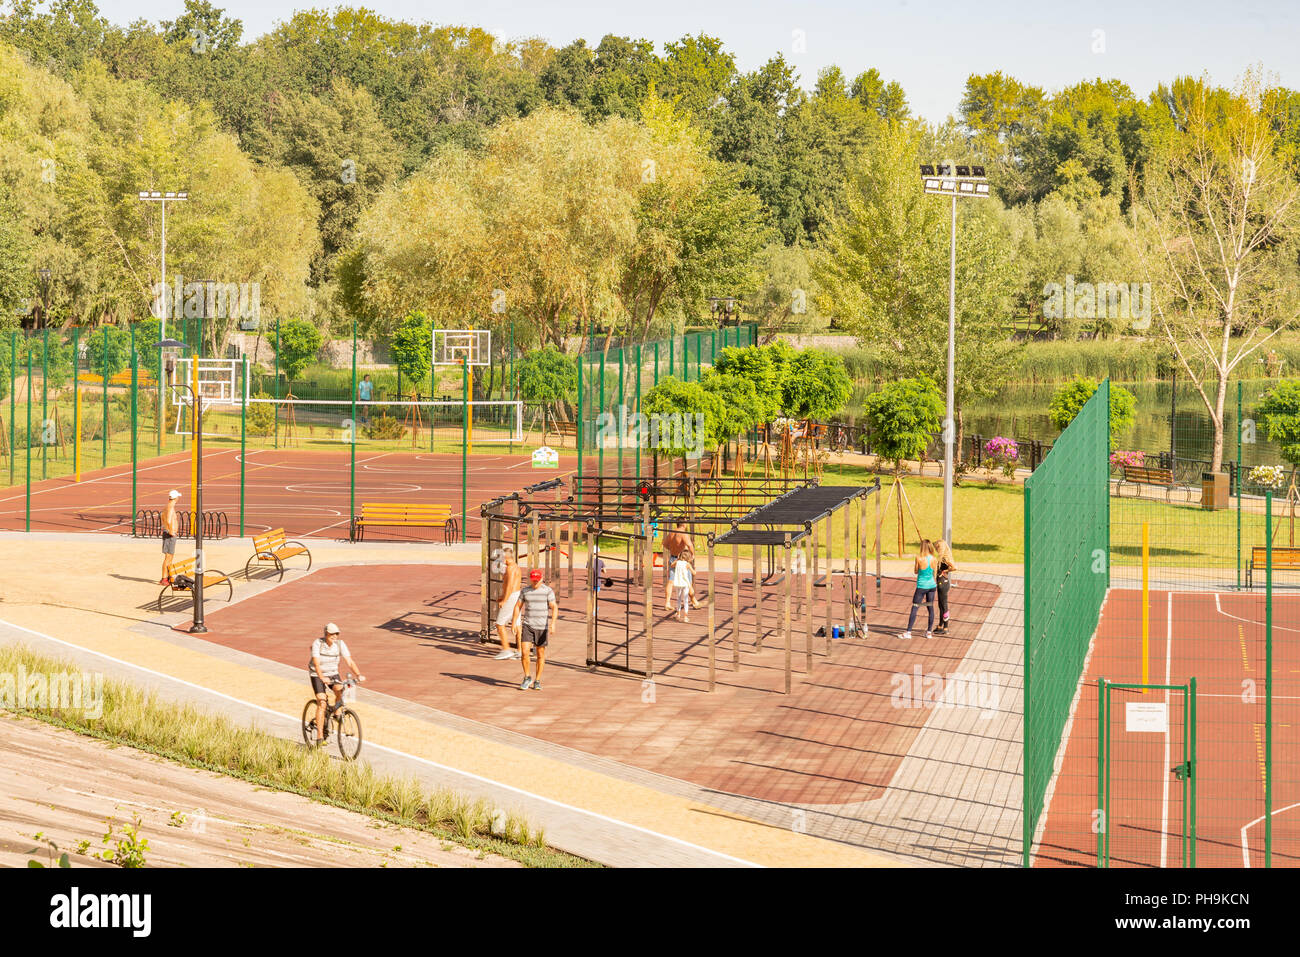 Kiev/Ukraine - August 23, 2018 -  Outdoor sports facility in the Natalka park of Kiev in Ukraine, close to the Dnieper river. People are training unde Stock Photo